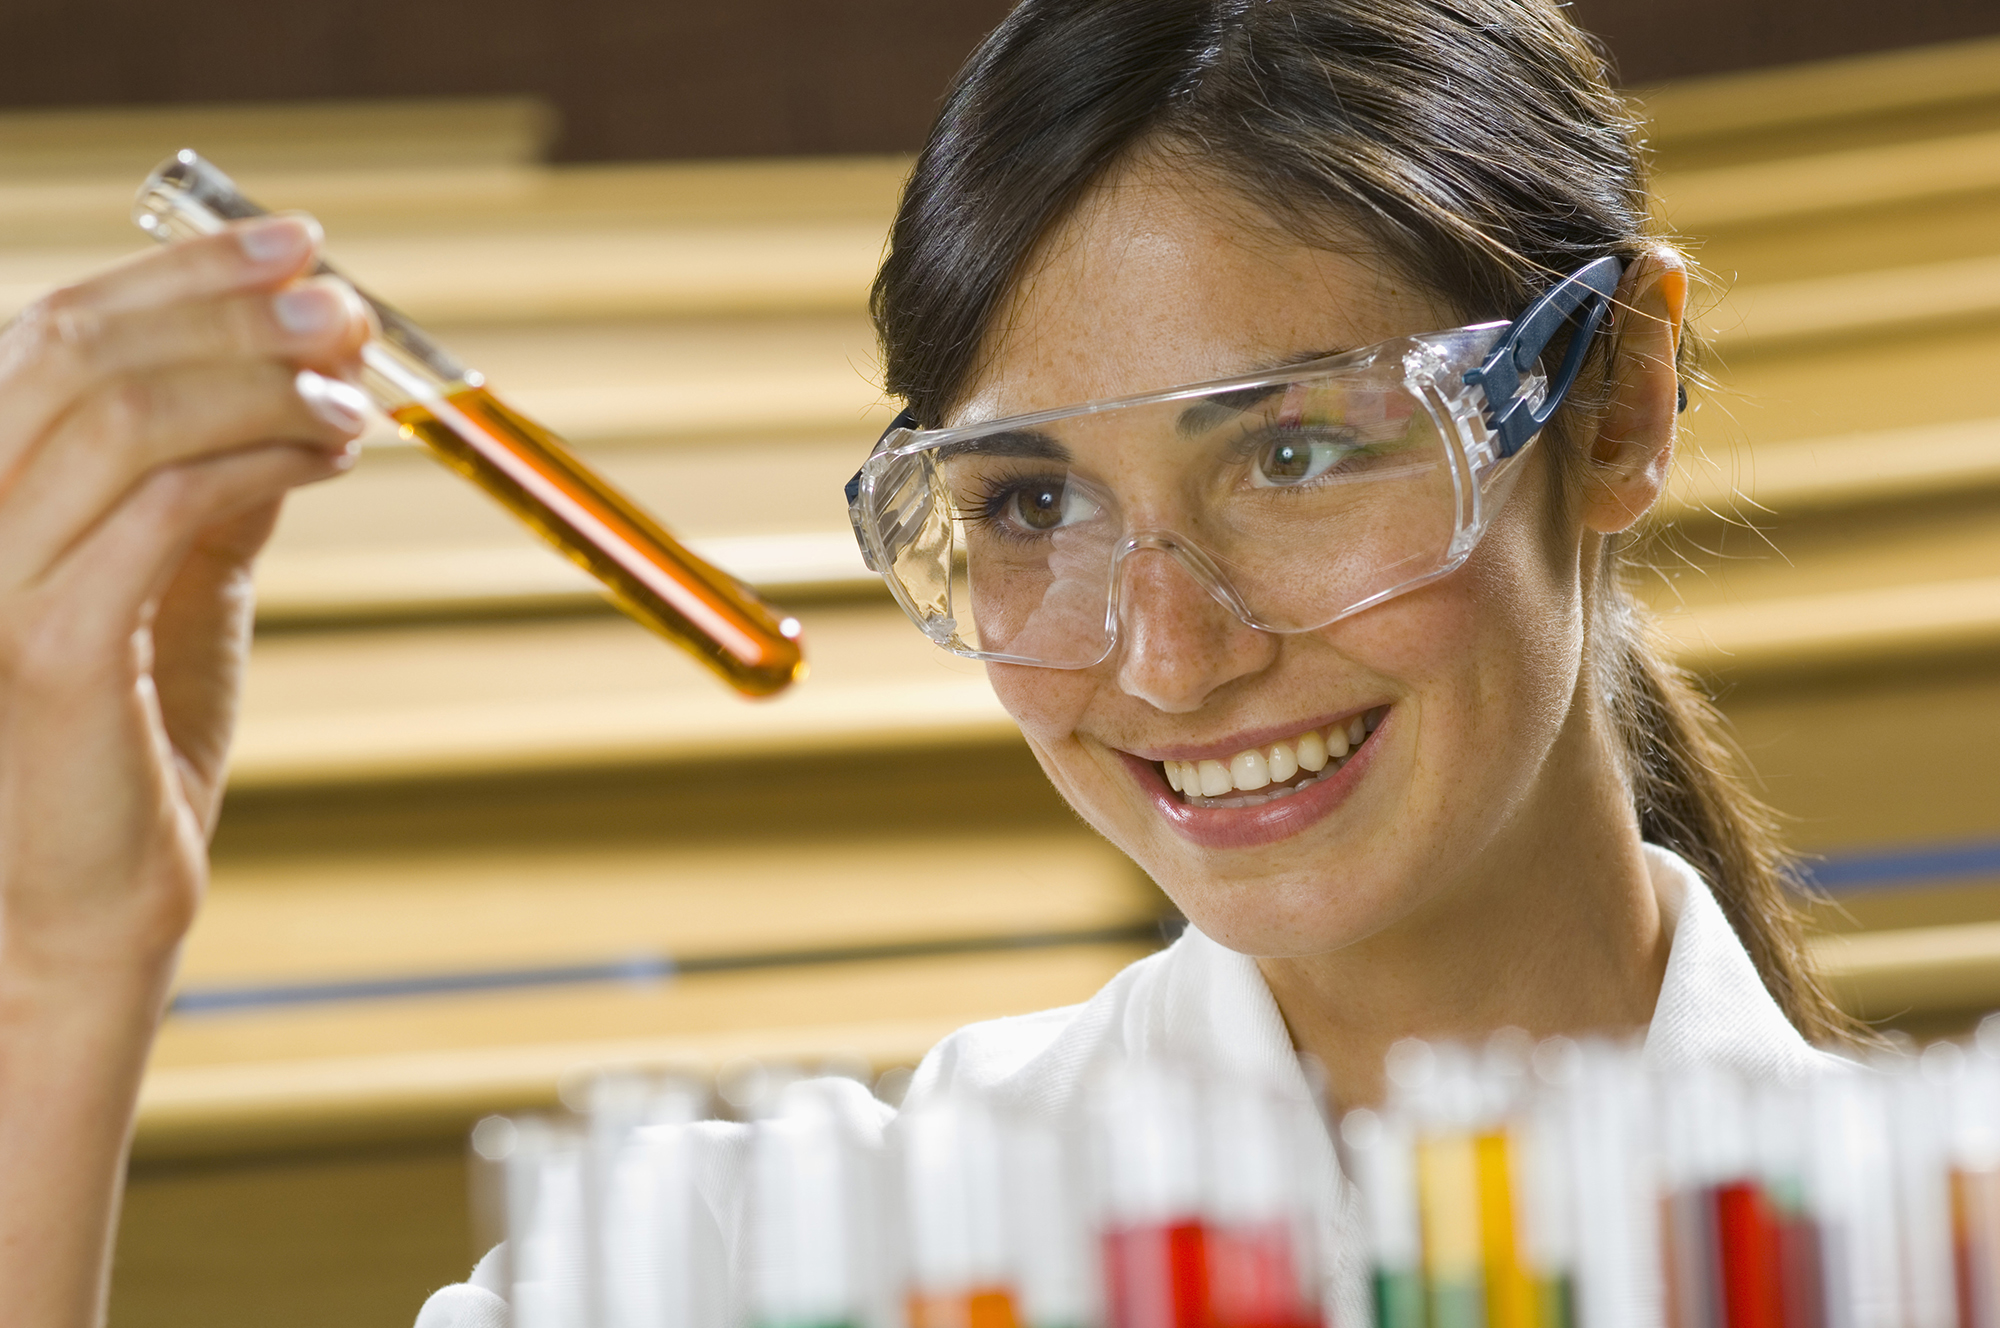 Female student looking at amber liquid in a test tube